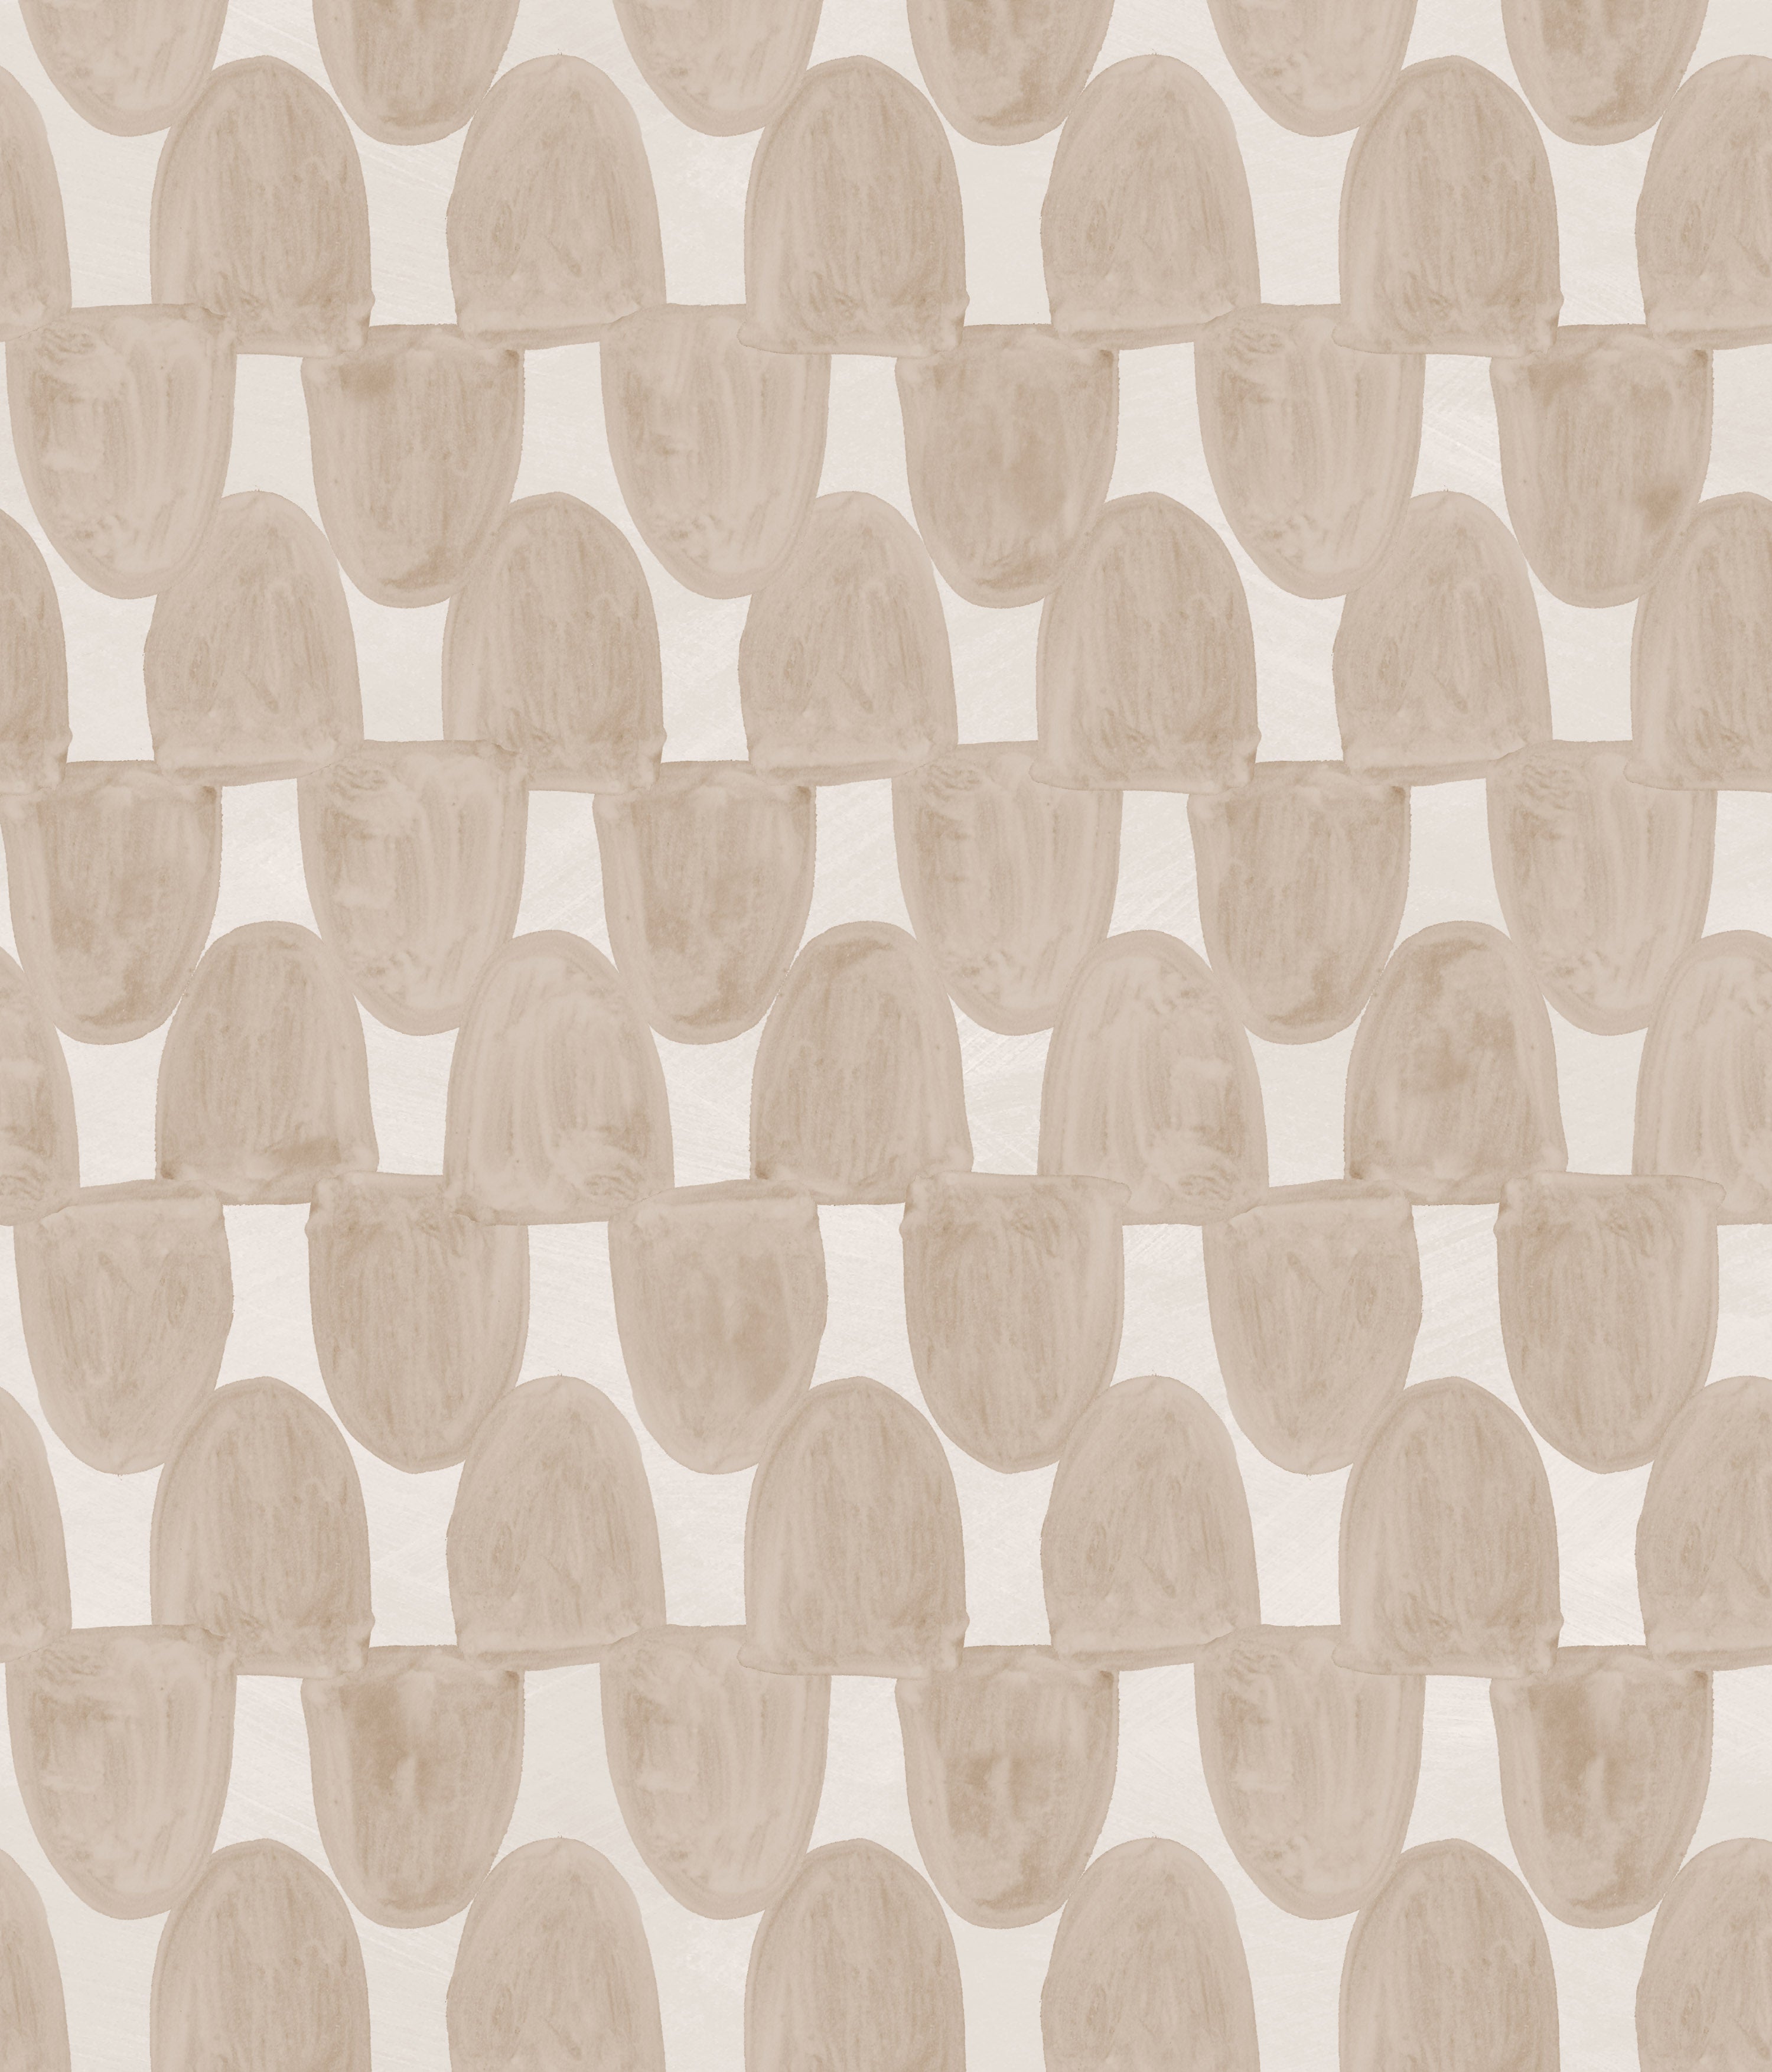 Detail of wallpaper in an abstract scalloped print in tan on a cream field.